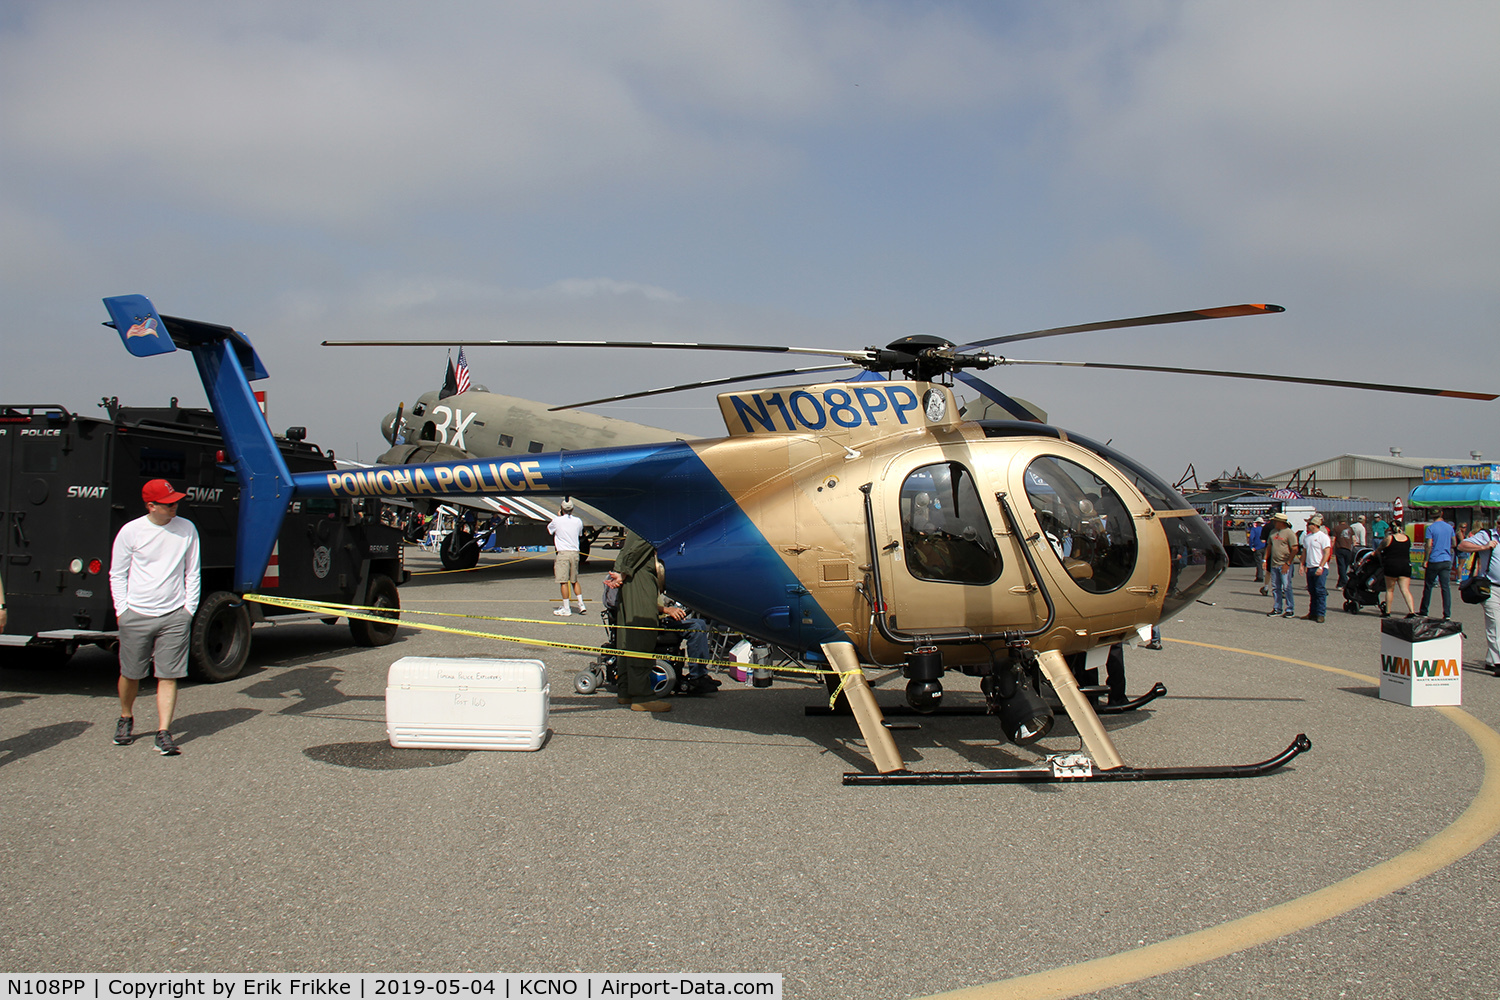 N108PP, 2008 MD Helicopters 369E C/N 0578E, Pomona Police